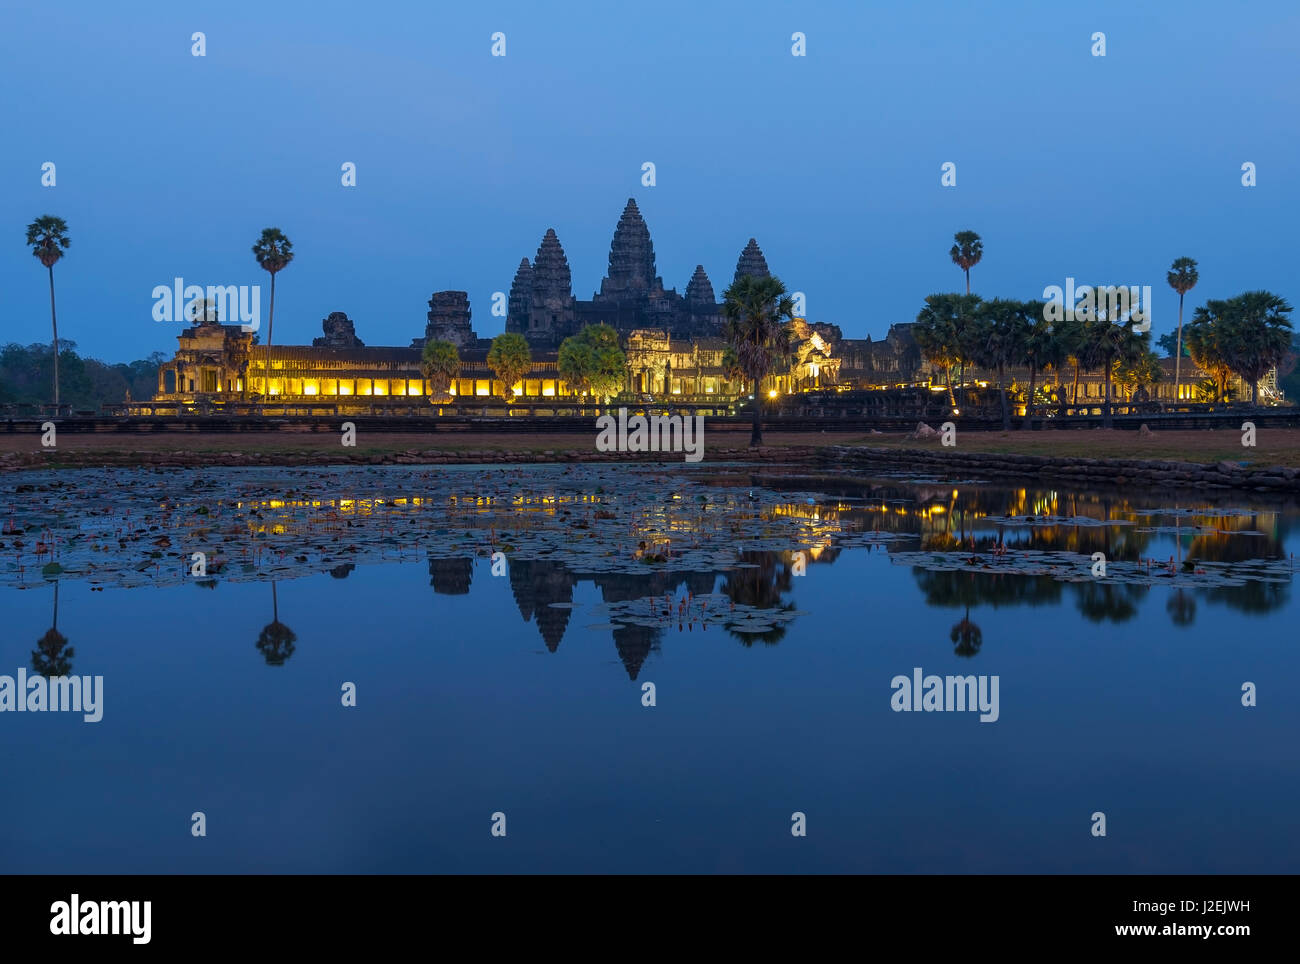 The majestic Angkor Wat ruins at night during twilight, reflected in the man made lake in front of the temple complex near Siem Reap, Cambodia. Stock Photo